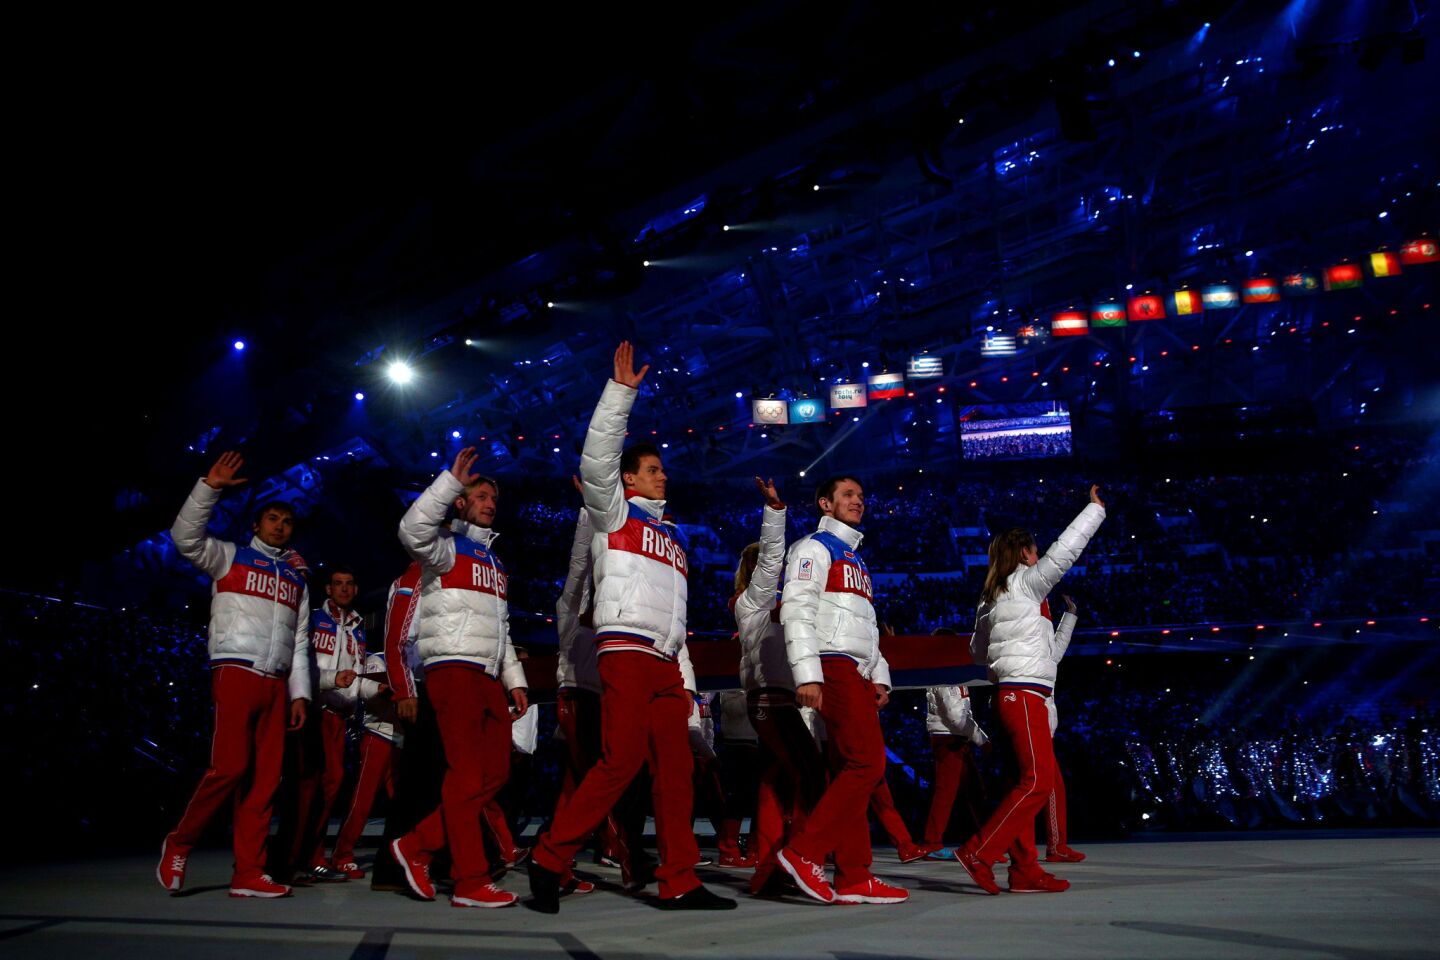 Russian athletes walk in for the 2014 Sochi Winter Olympics Closing Ceremony at Fisht Olympic Stadium in Sochi, Russia.